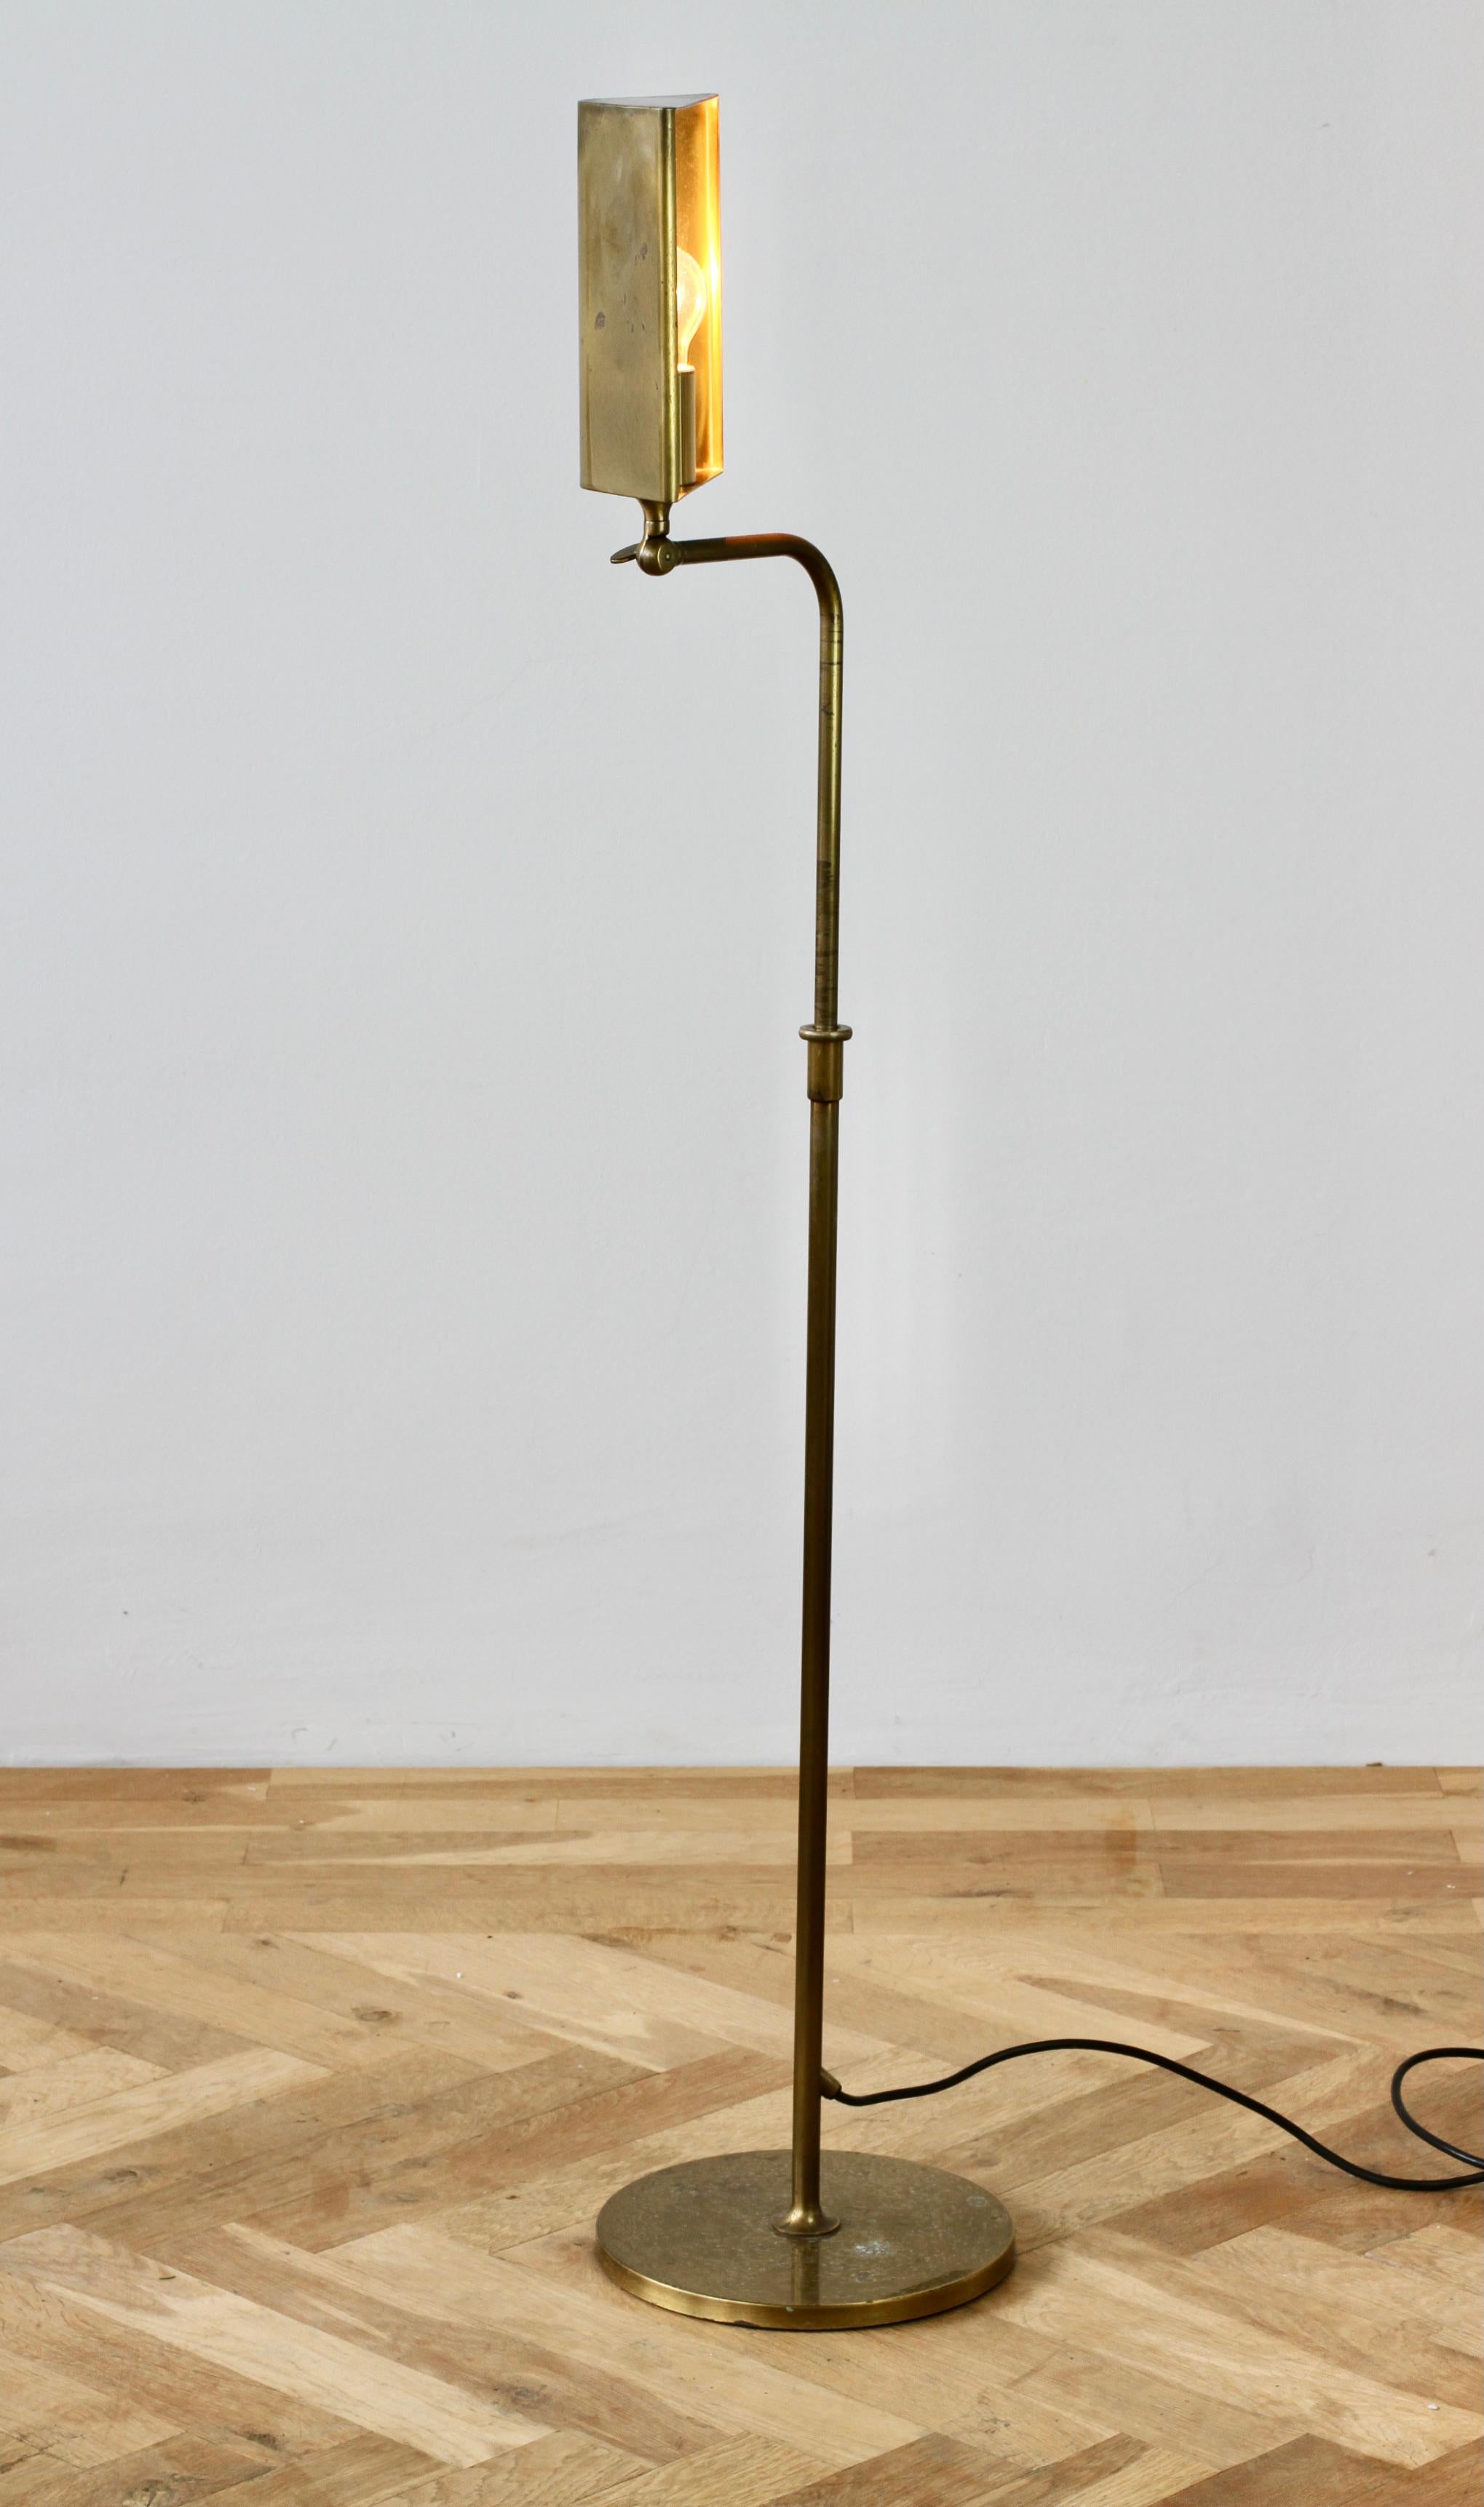 Mid-Century Modern vintage German made floor lamp in lacquered burnished brushed brass (model 'Cervantes') designed by Florian Schulz circa 1970s - this particular example was probably manufactured in the late 1980s and is in good vintage condition